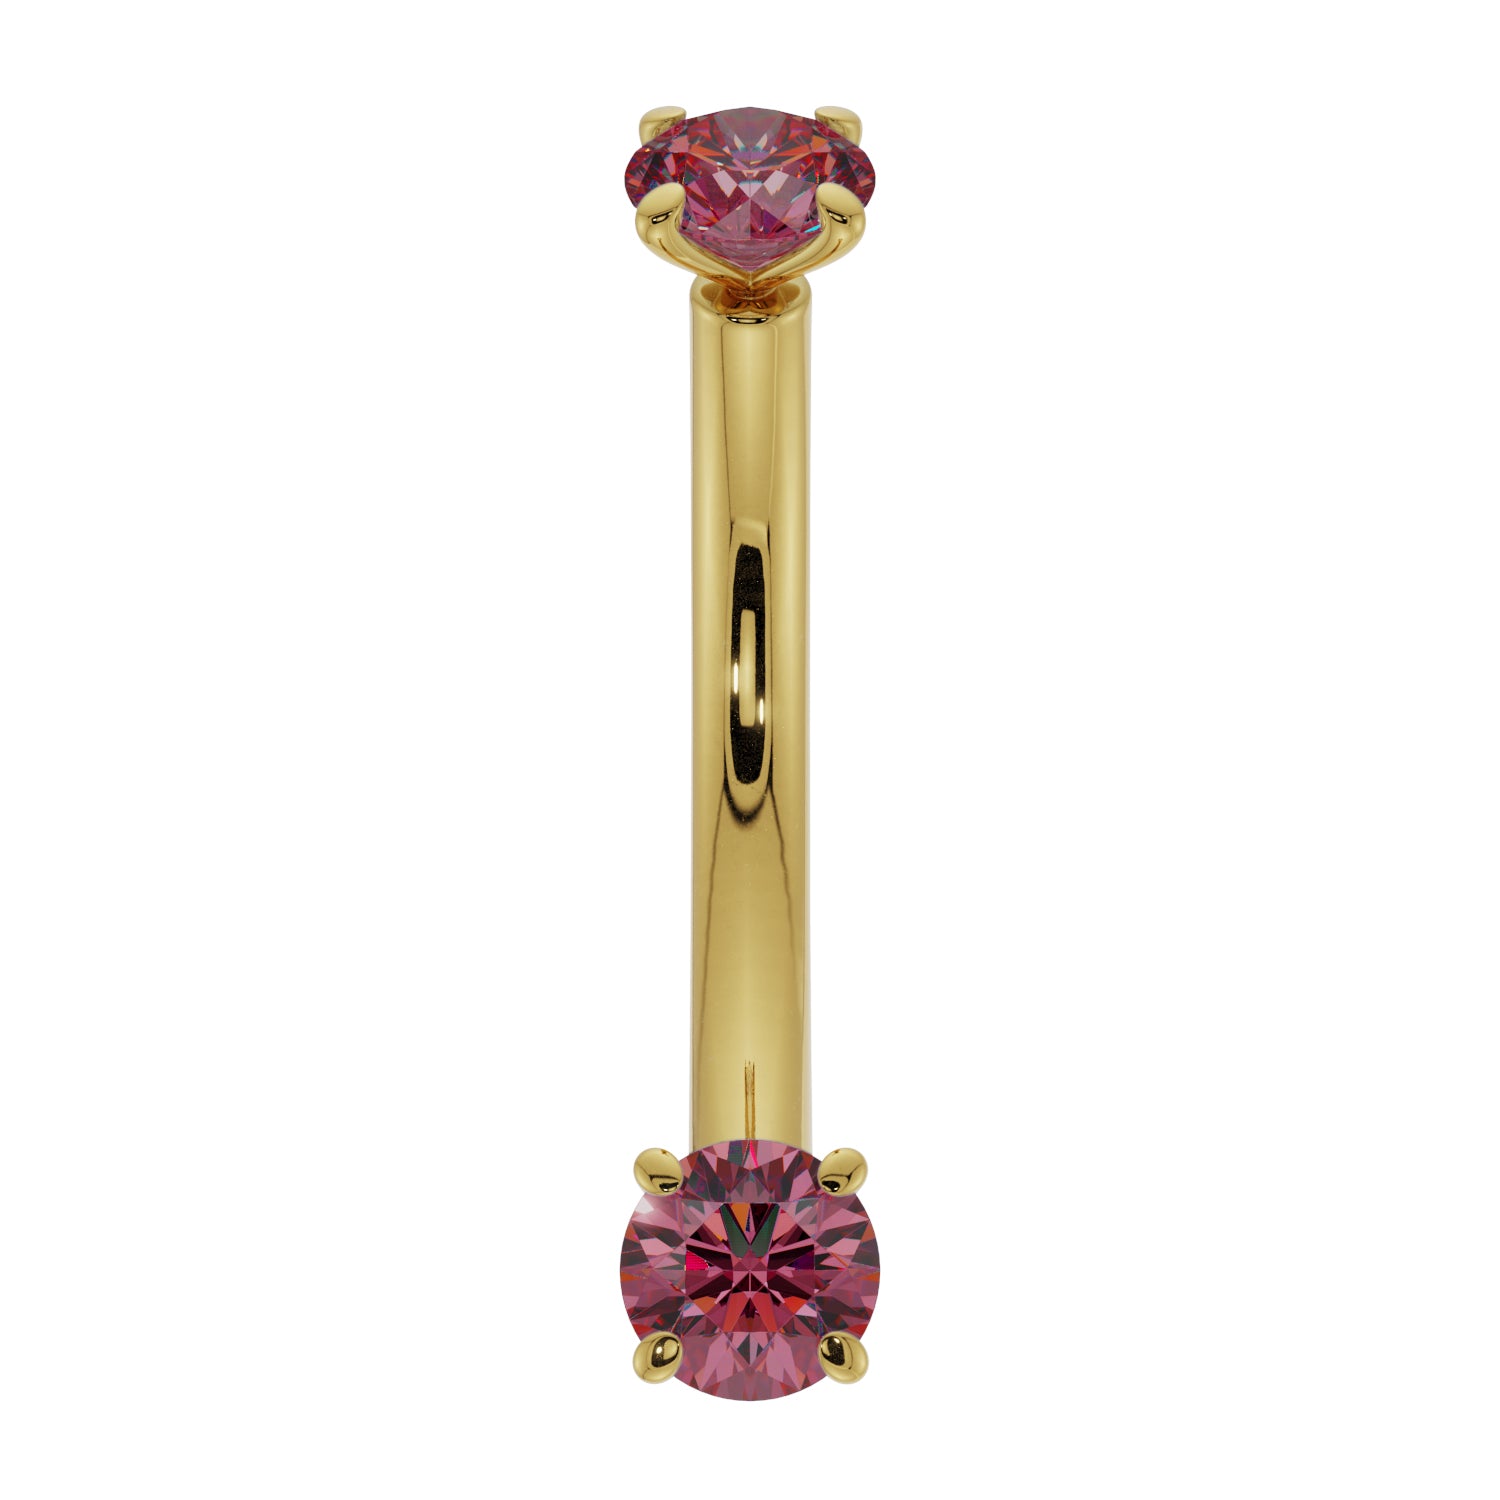 Dainty Ruby Prong-Set Curved Barbell for Eyebrow Rook Belly-14K Yellow Gold   16G (1.2mm)   7 16